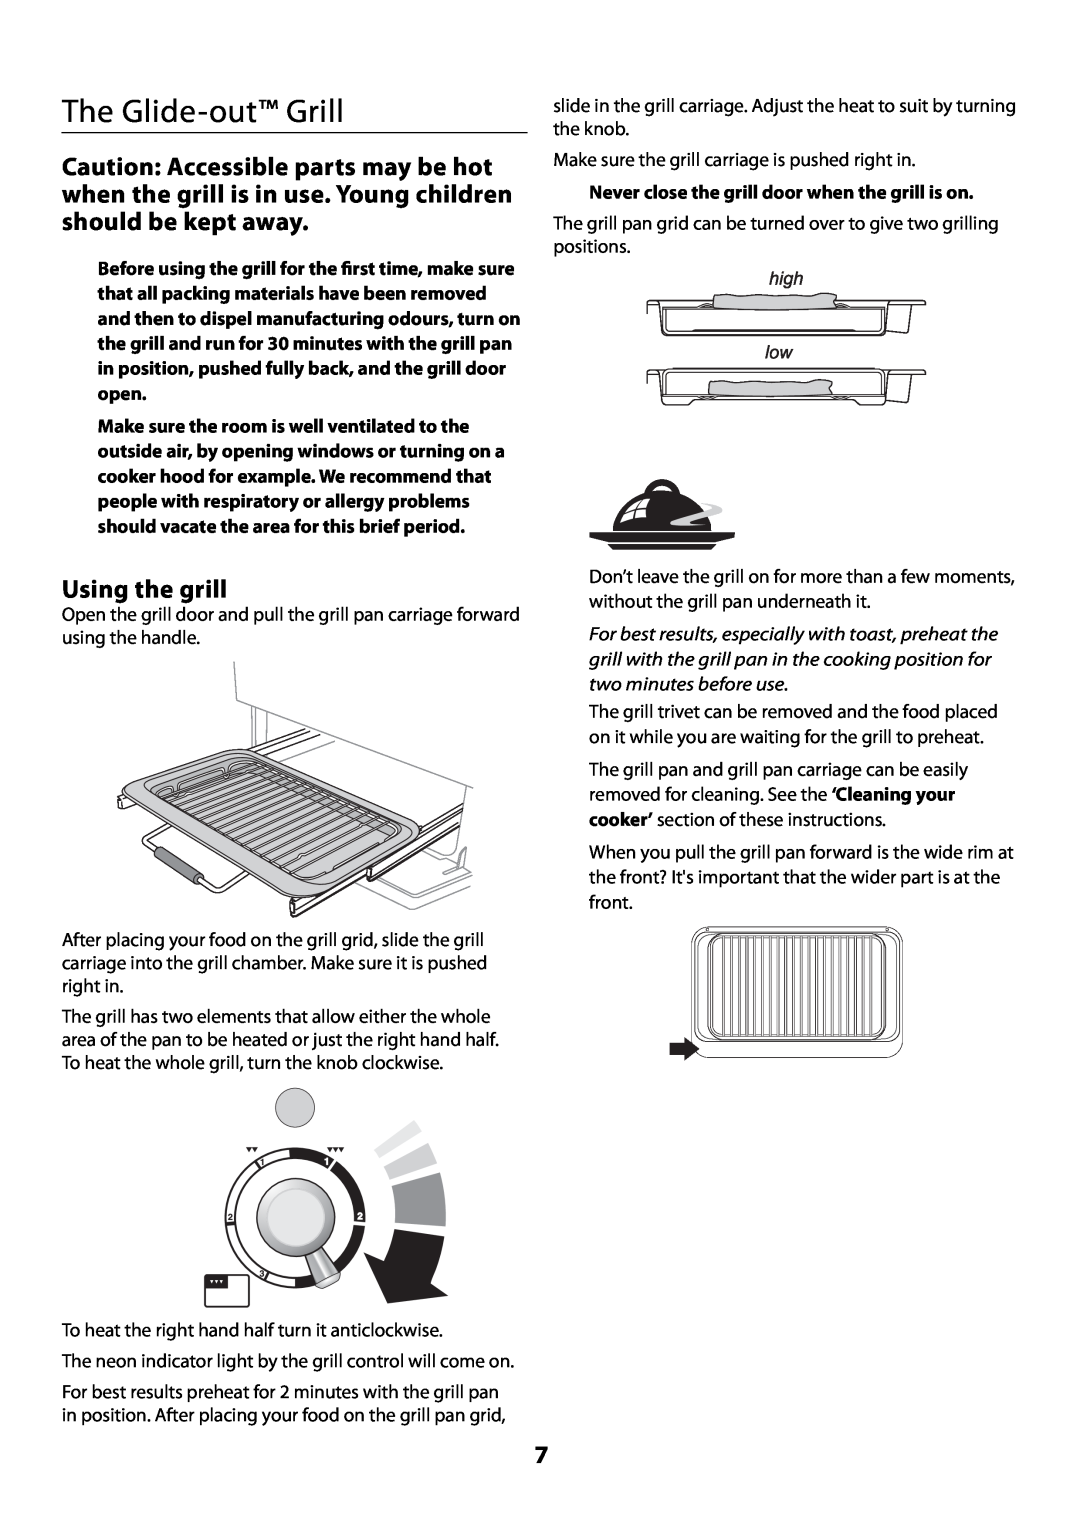 Rangemaster U109300 - 01 manual The Glide-out Grill, Using the grill, Never close the grill door when the grill is on 